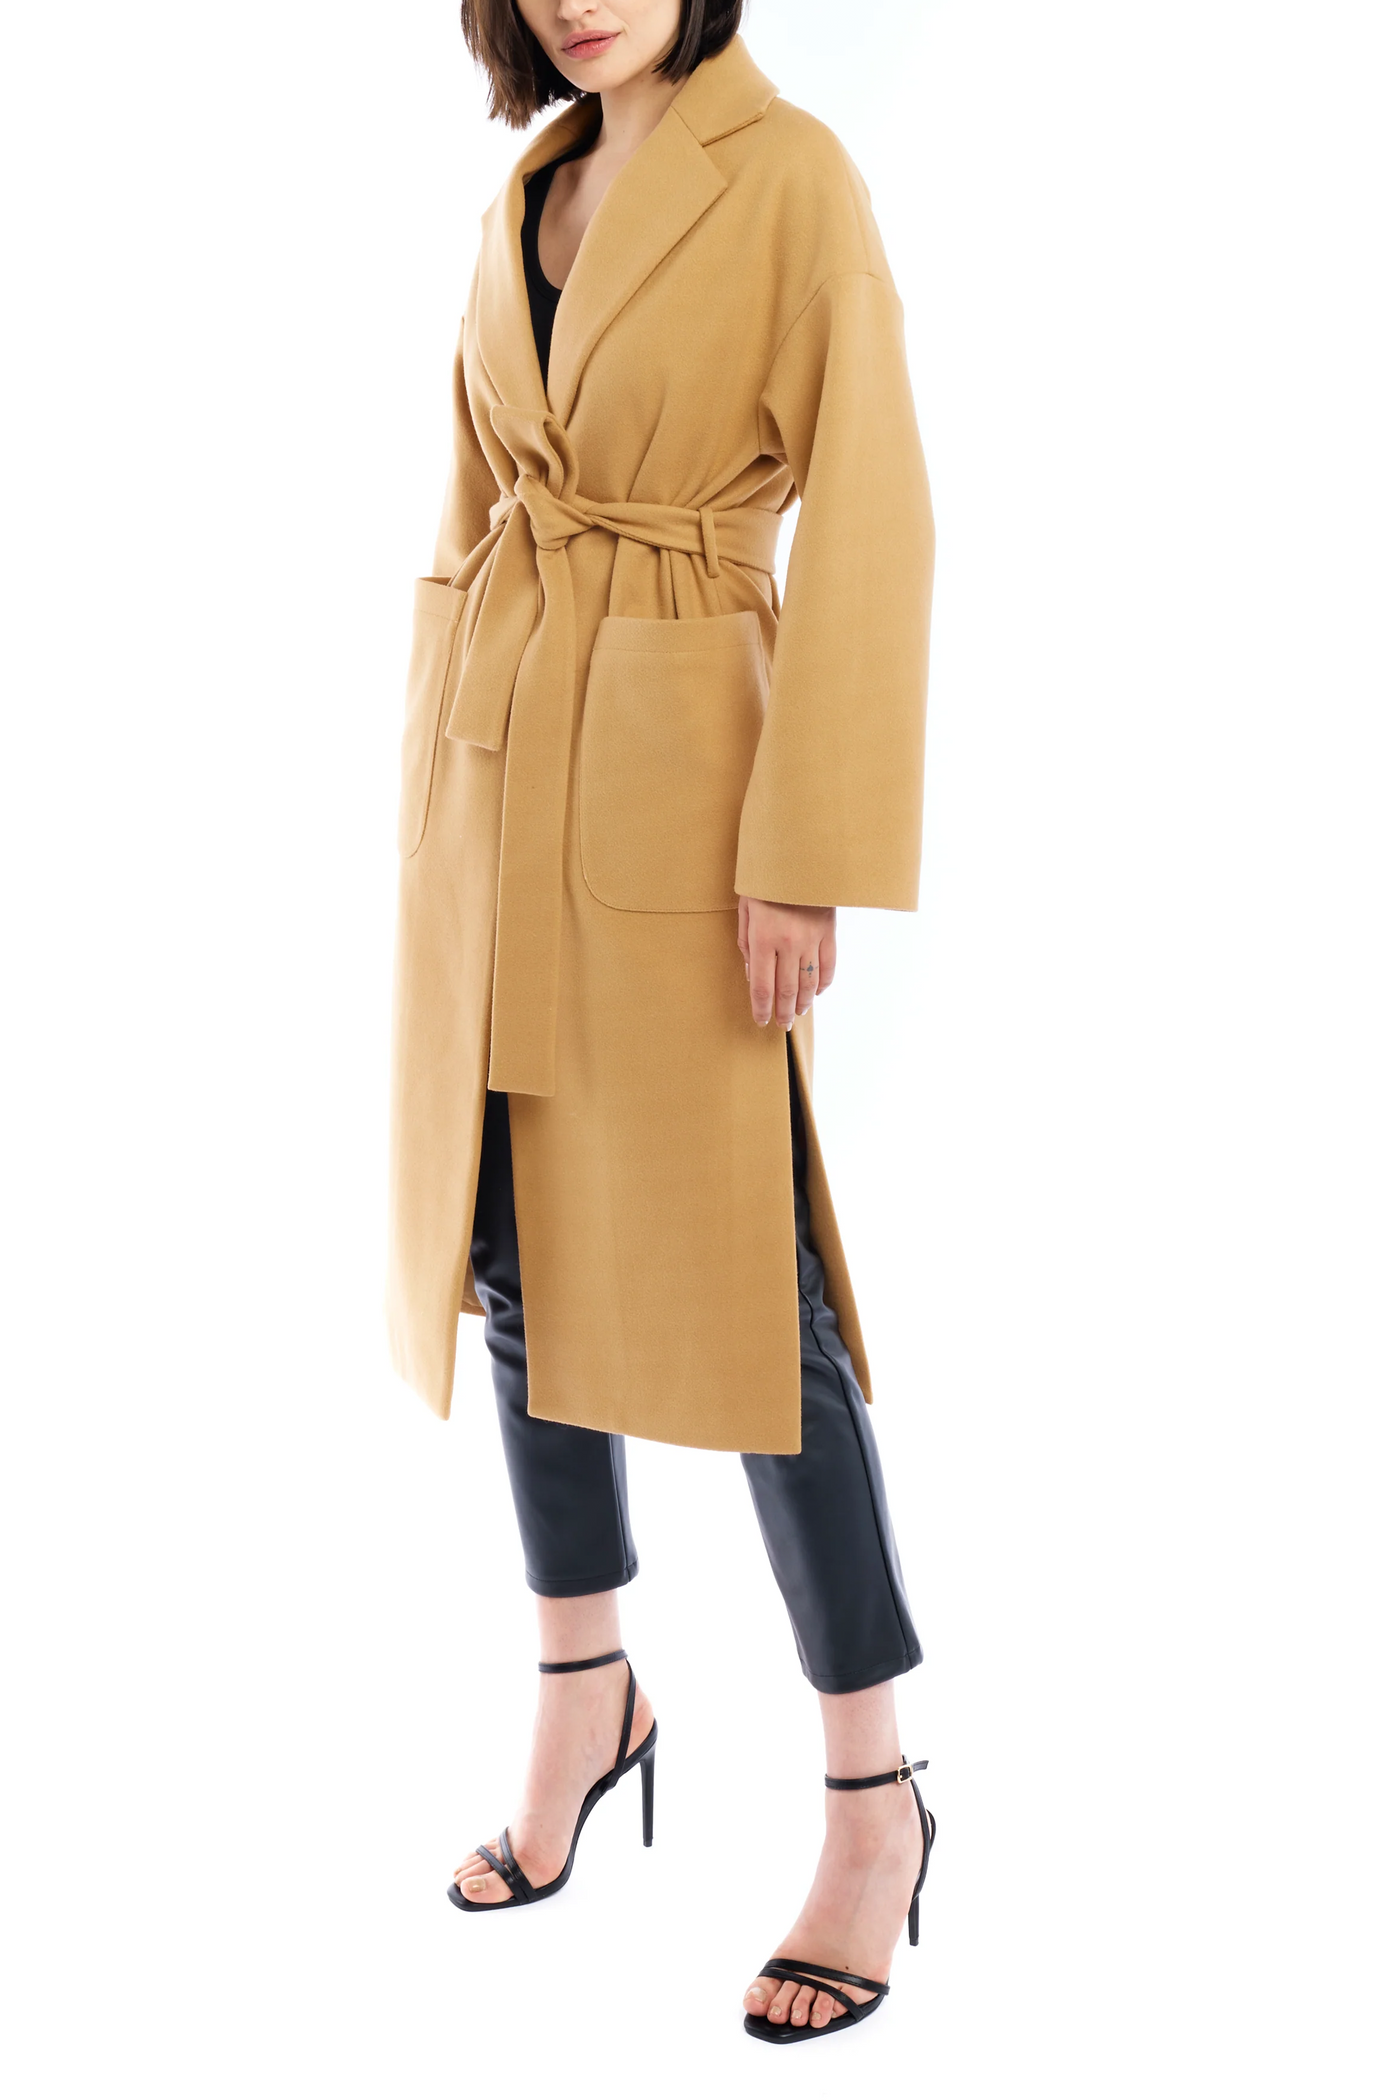 LBLC the Label:  Marie Tie Front Midi Length Trench Jacket